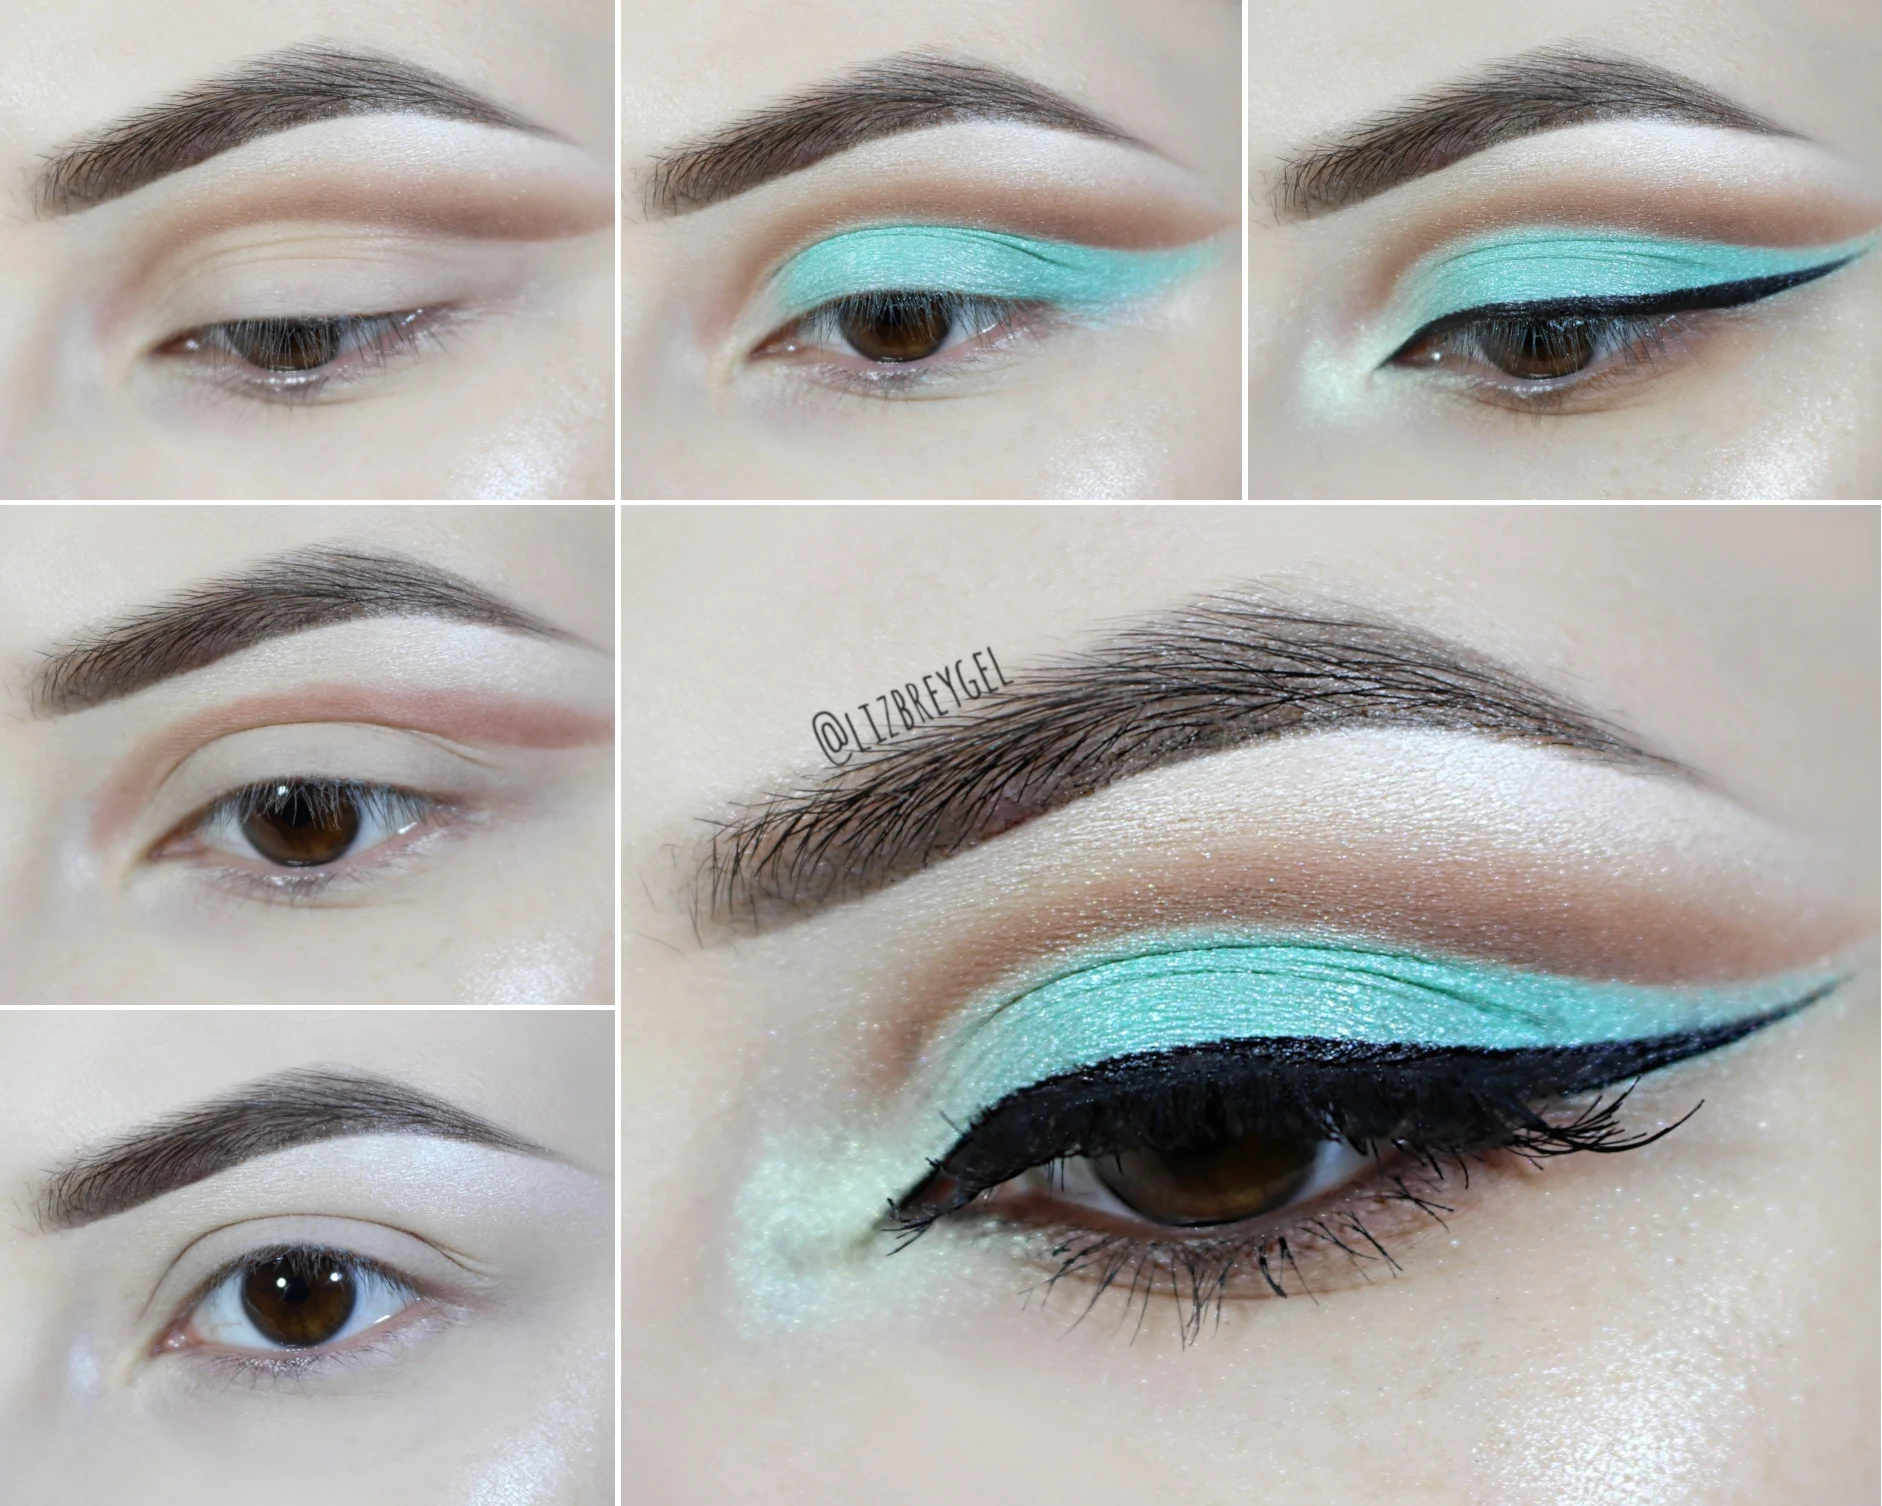 a collage with a makeup pictorial showing how to do an cut crease eye look inspired by Nicki Minaj